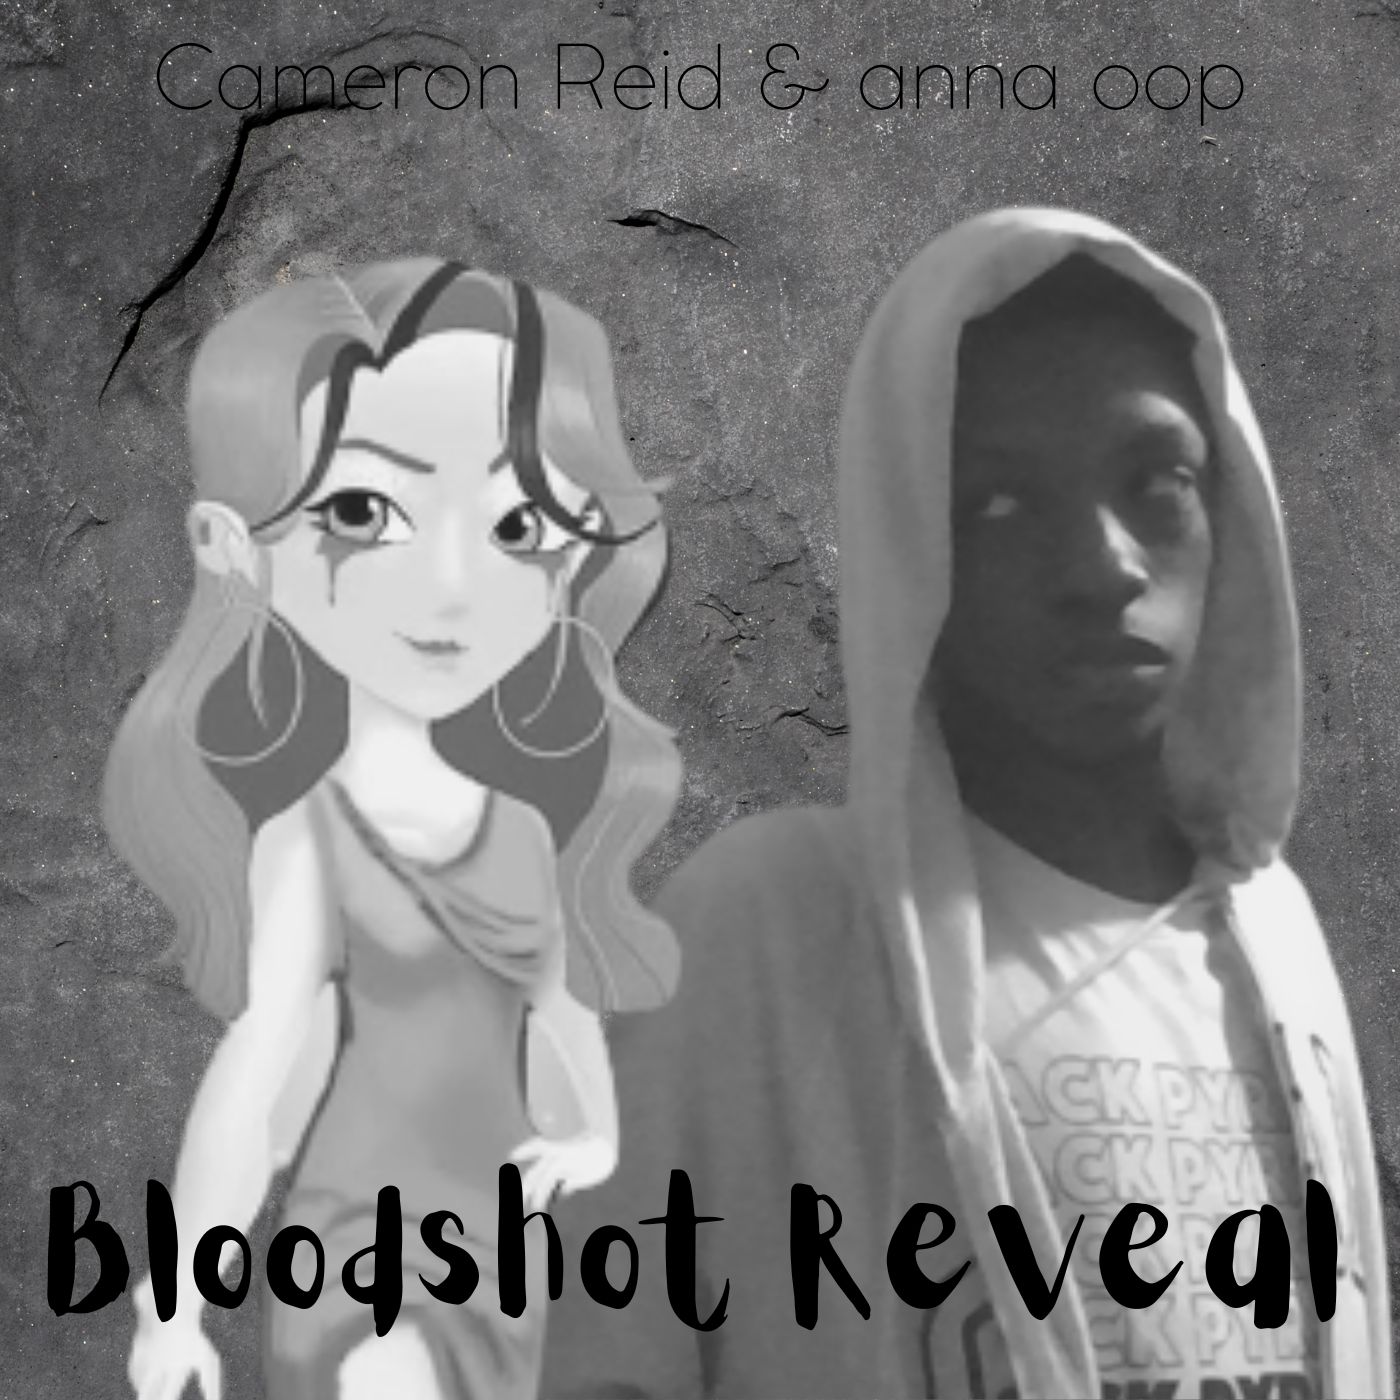 Cameron Reid ft. featuring anna oop Bloodshot Reveal cover artwork